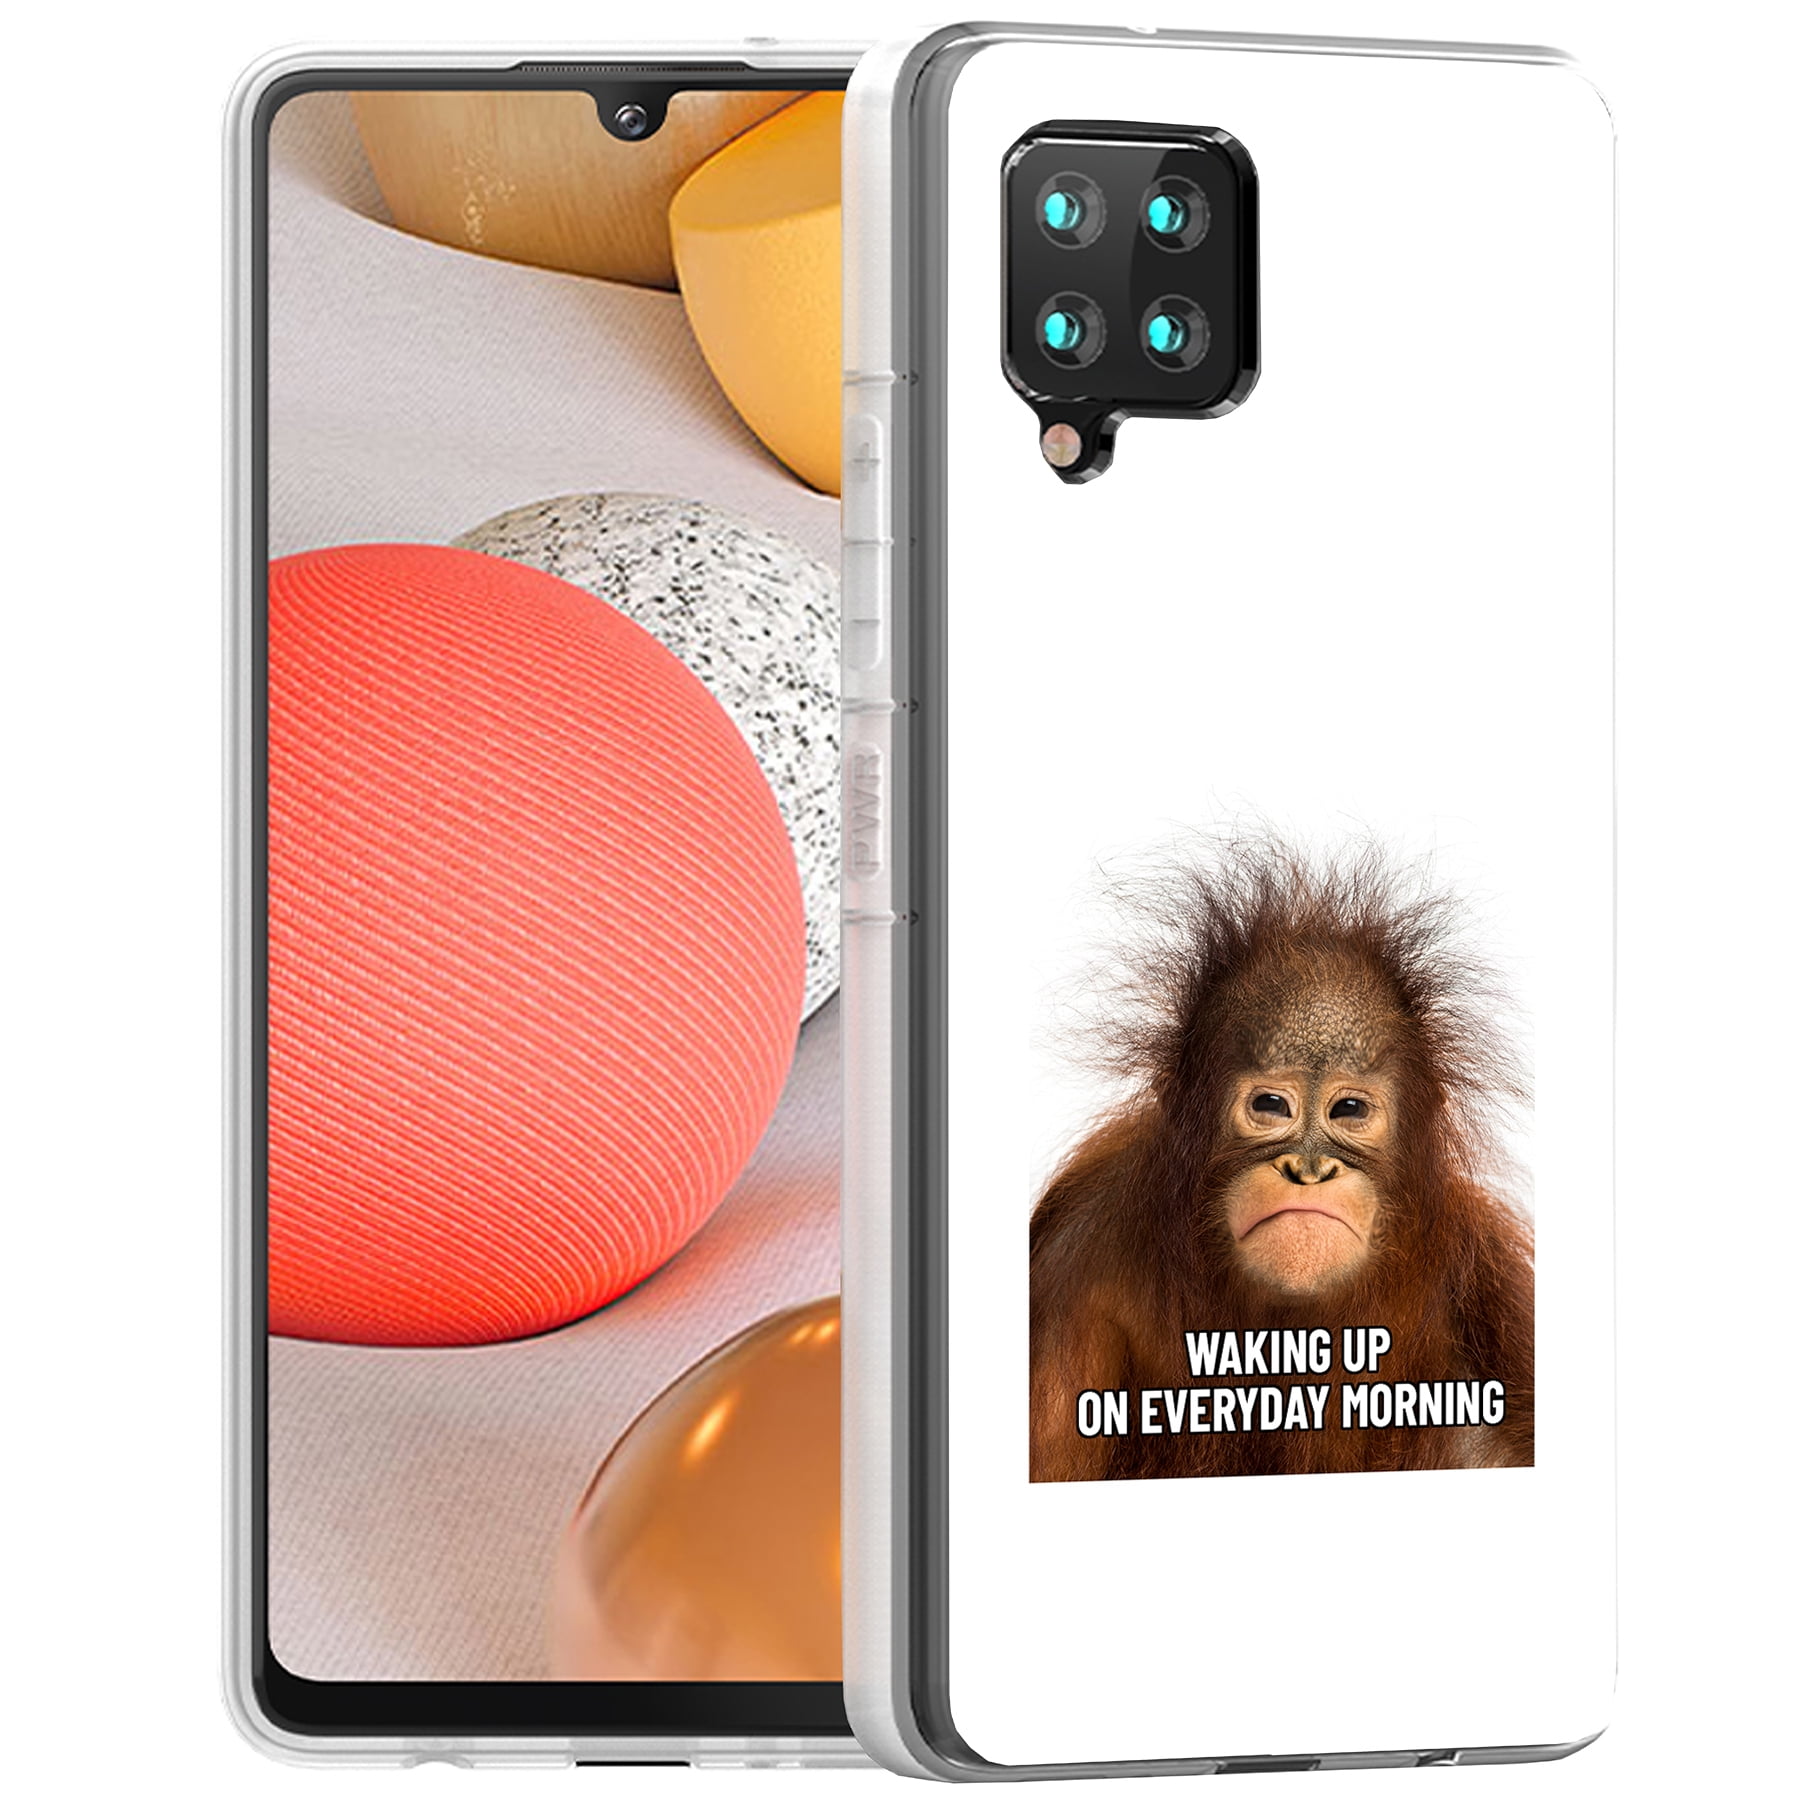 TalkingCase Slim Case Cover Compatible for Samsung Galaxy A42 5G, Funny Meme  Waking Up Print, Thin, Flexible, Soft, USA 